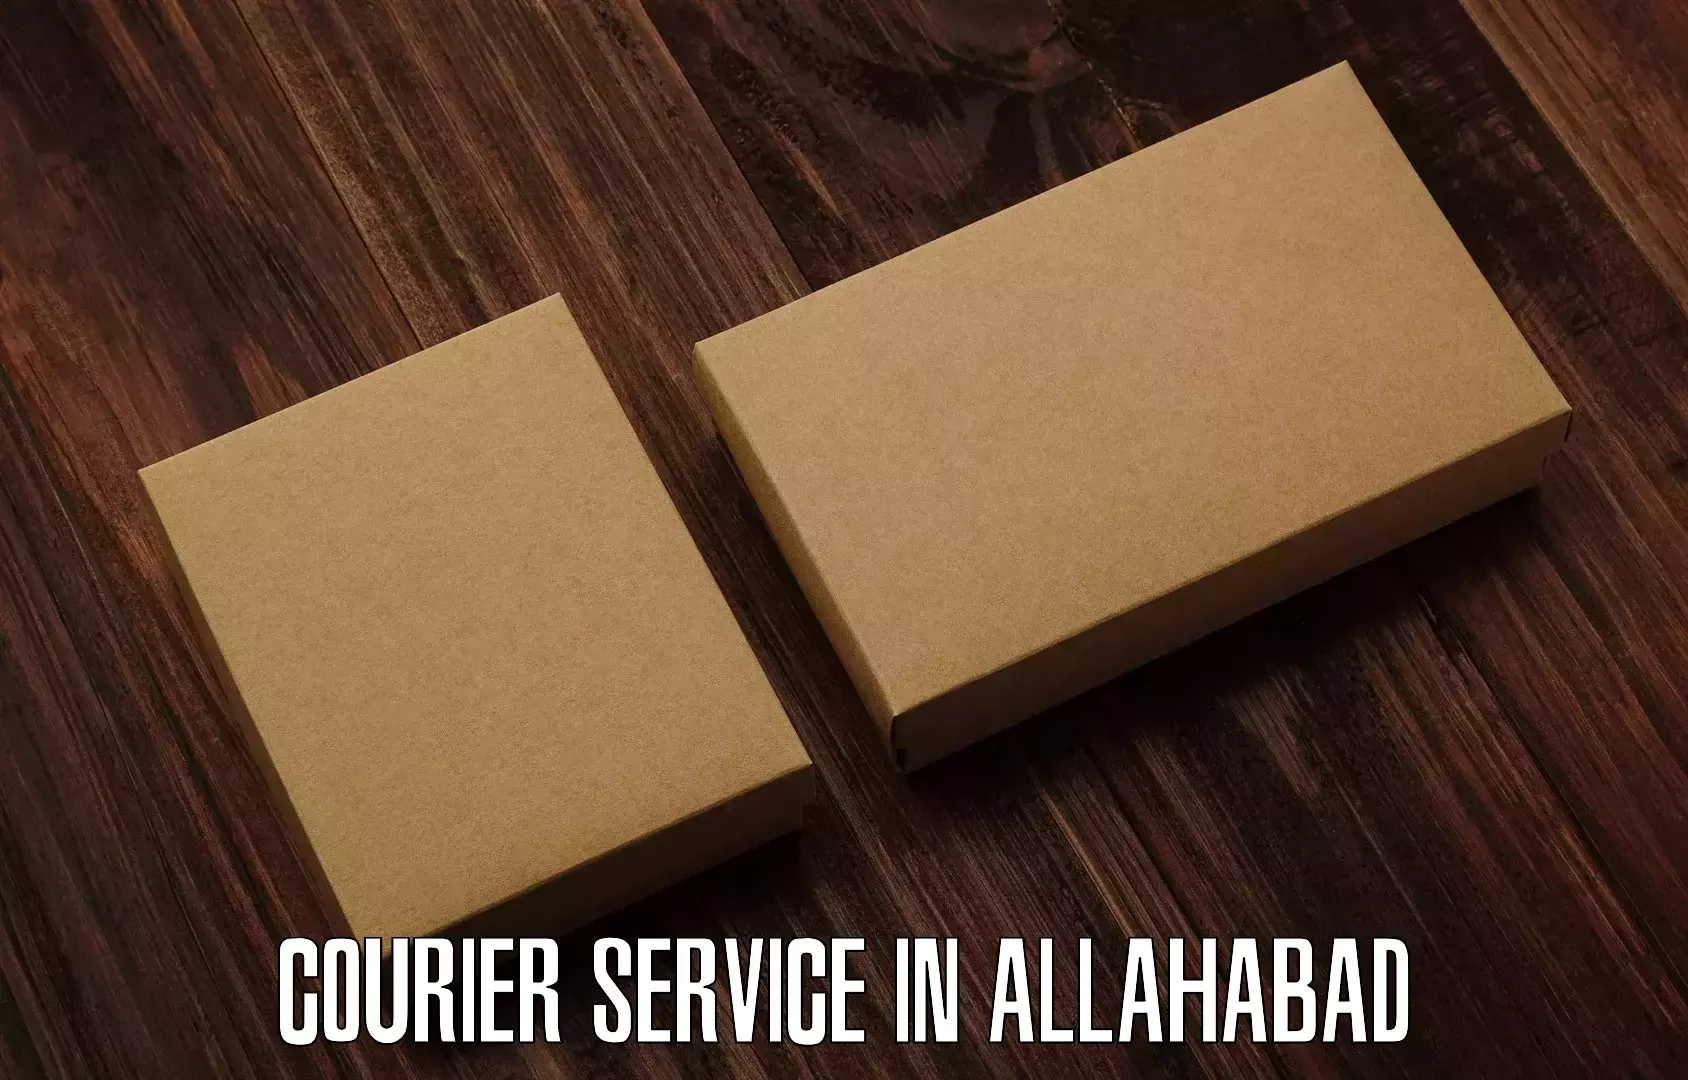 Subscription-based courier in Allahabad